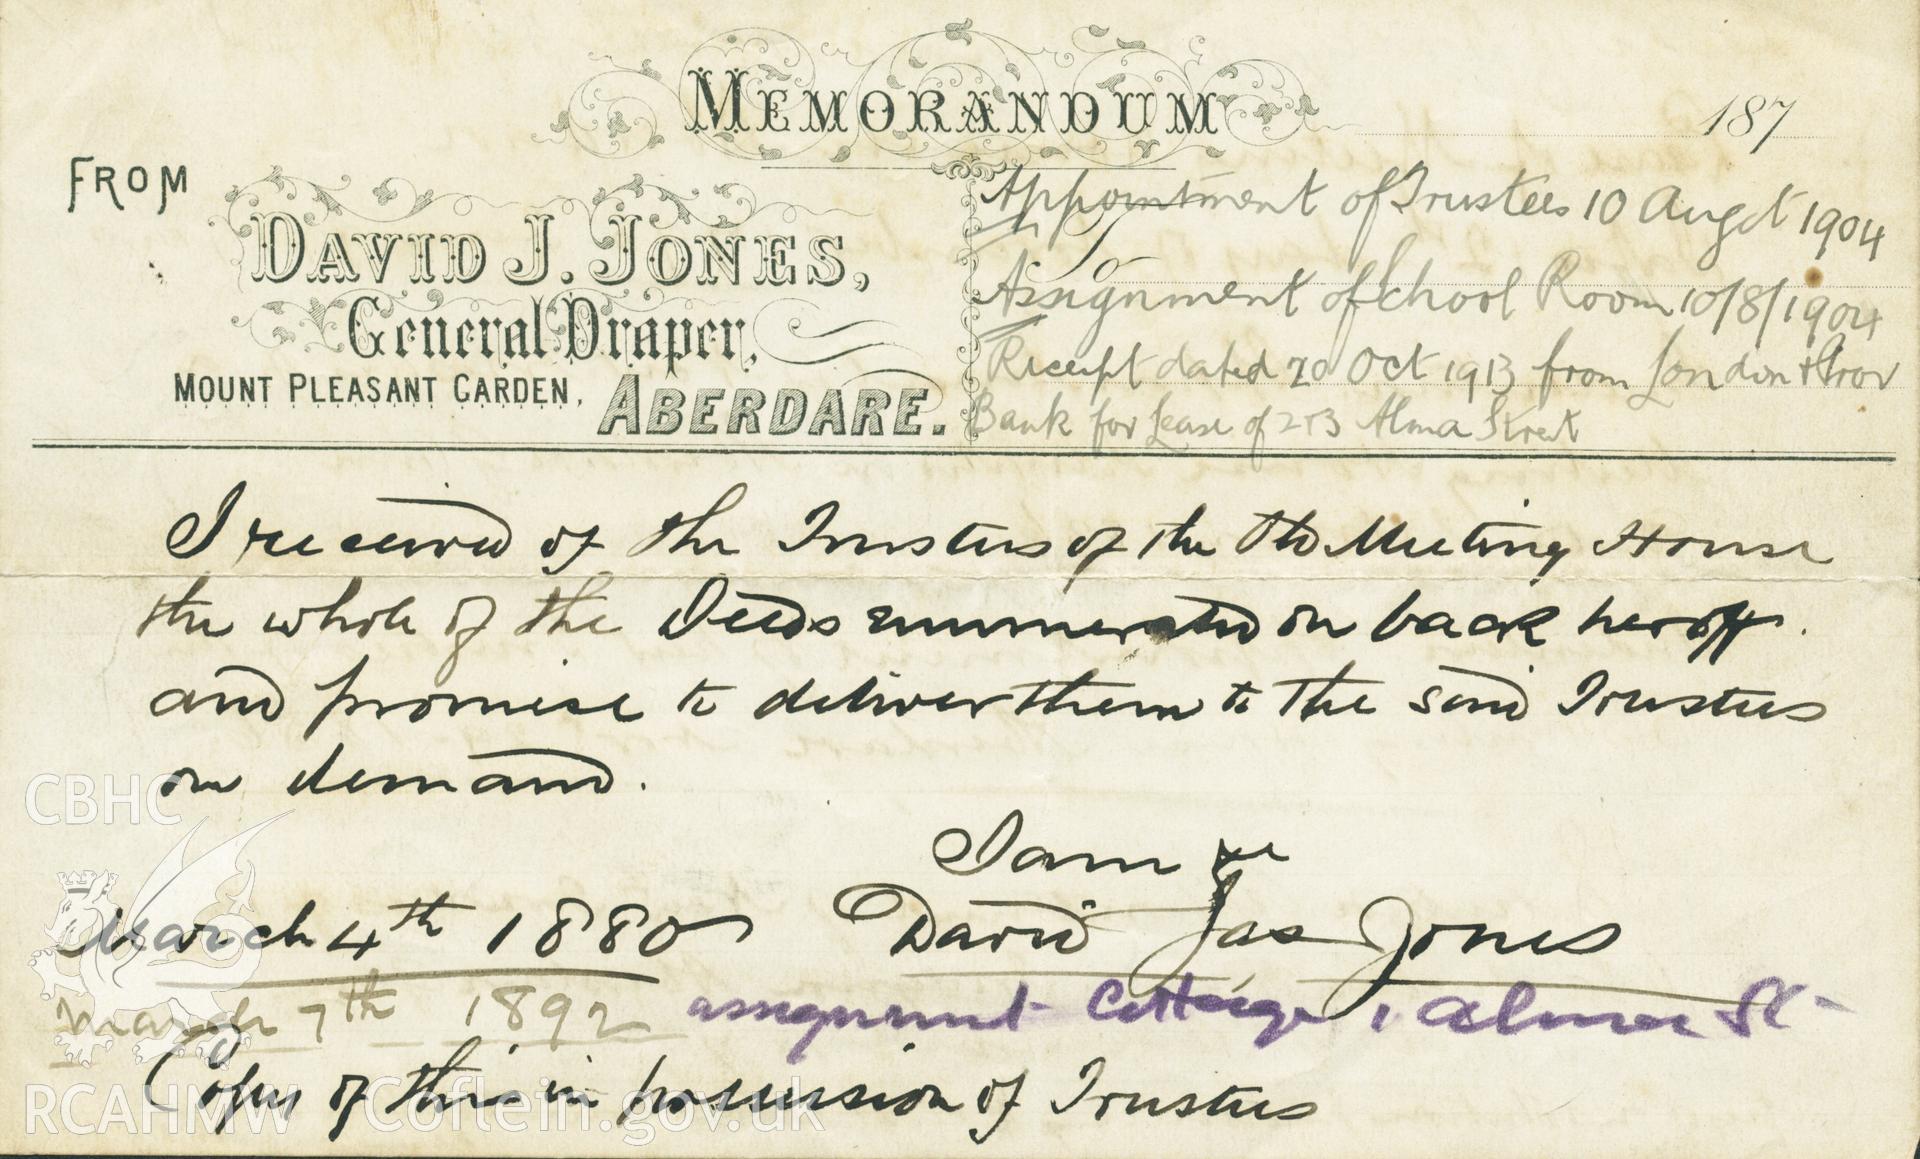 Memorandum from David J. Jones, General Draper, Mount Pleasant Garden, Aberdare, dated 4th March 1880 and 7th March 1892. Donated to the RCAHMW during the Digital Dissent Project.